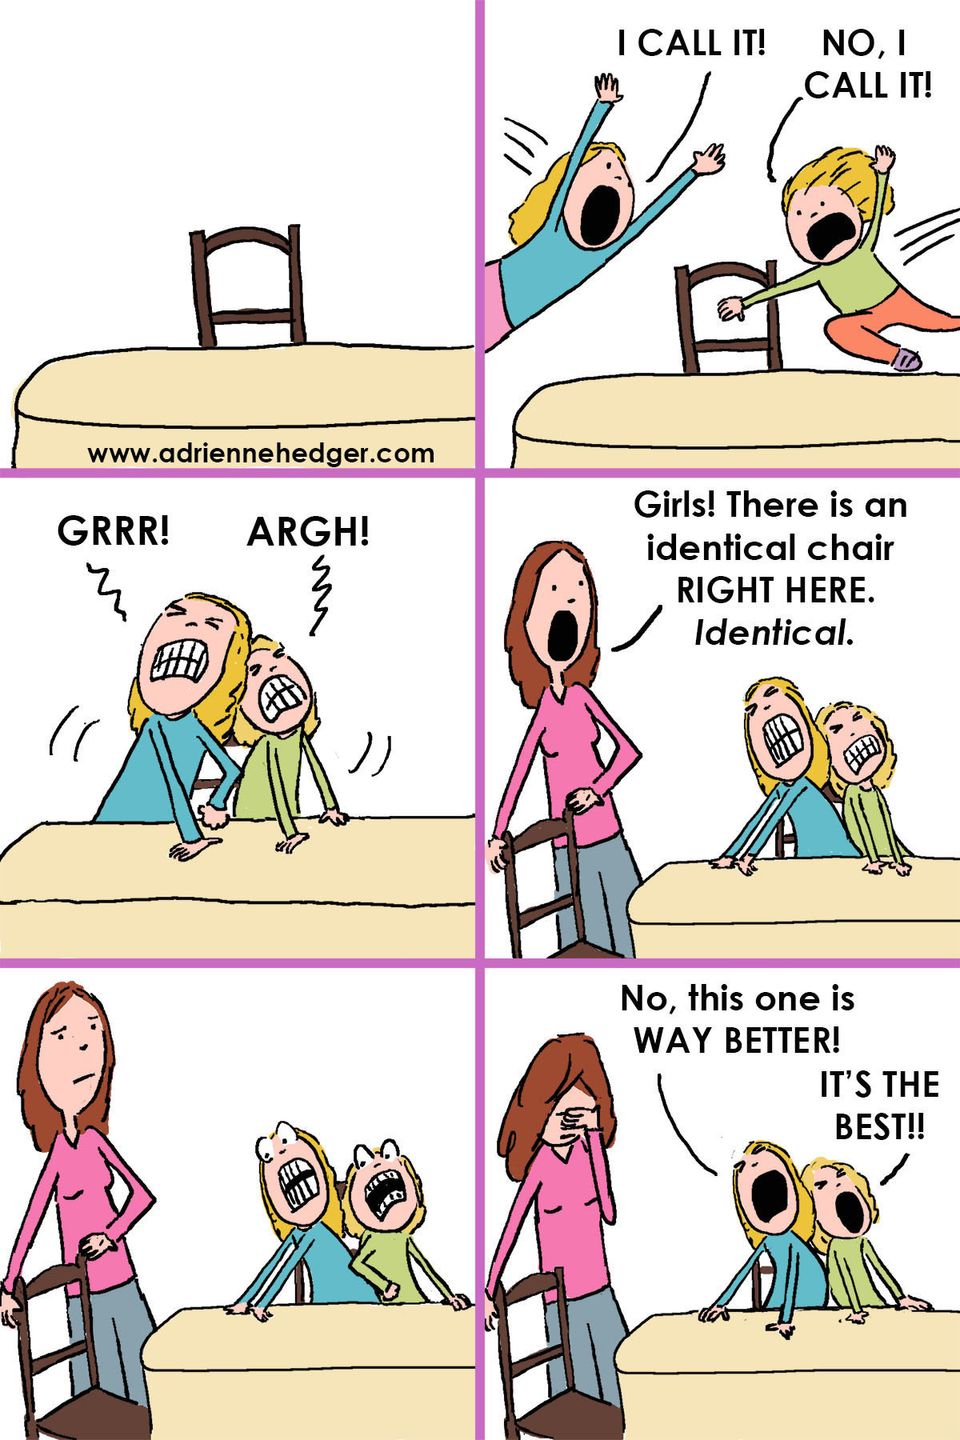 24 Hilarious Comics About Sibling Relationships | HuffPost Life